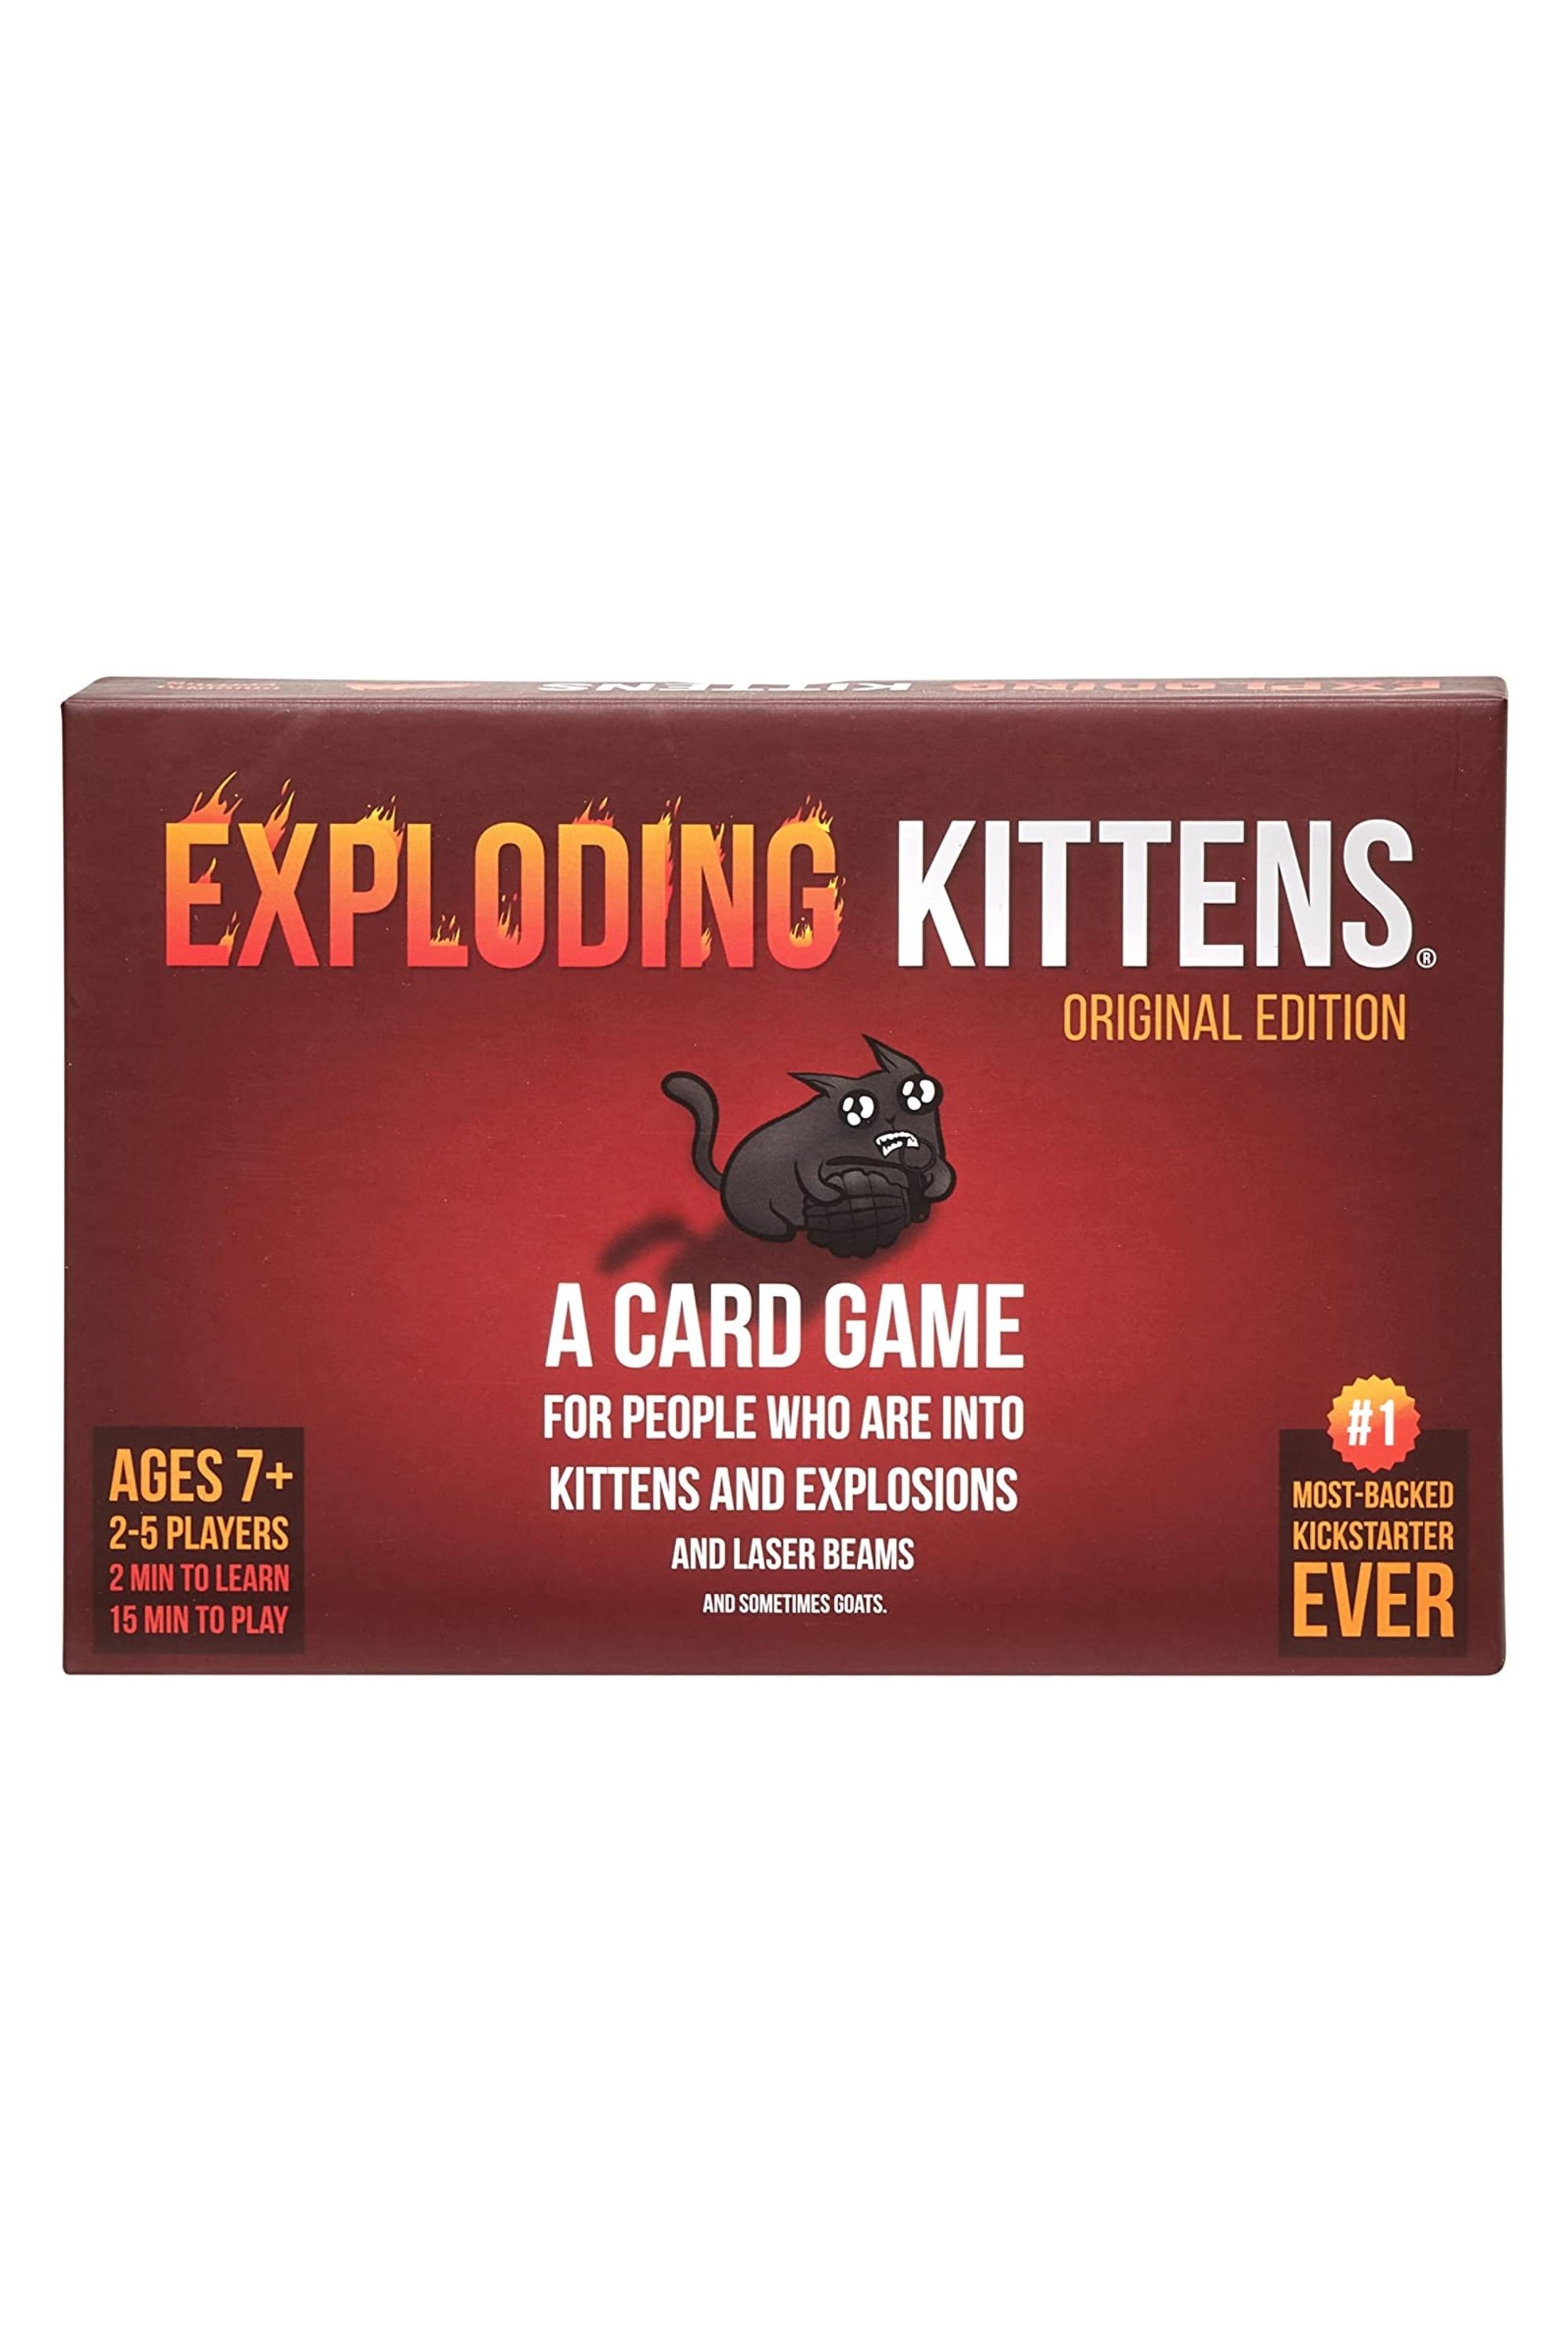 Latest From 'Exploding Kittens' Creators Pushes Players Further